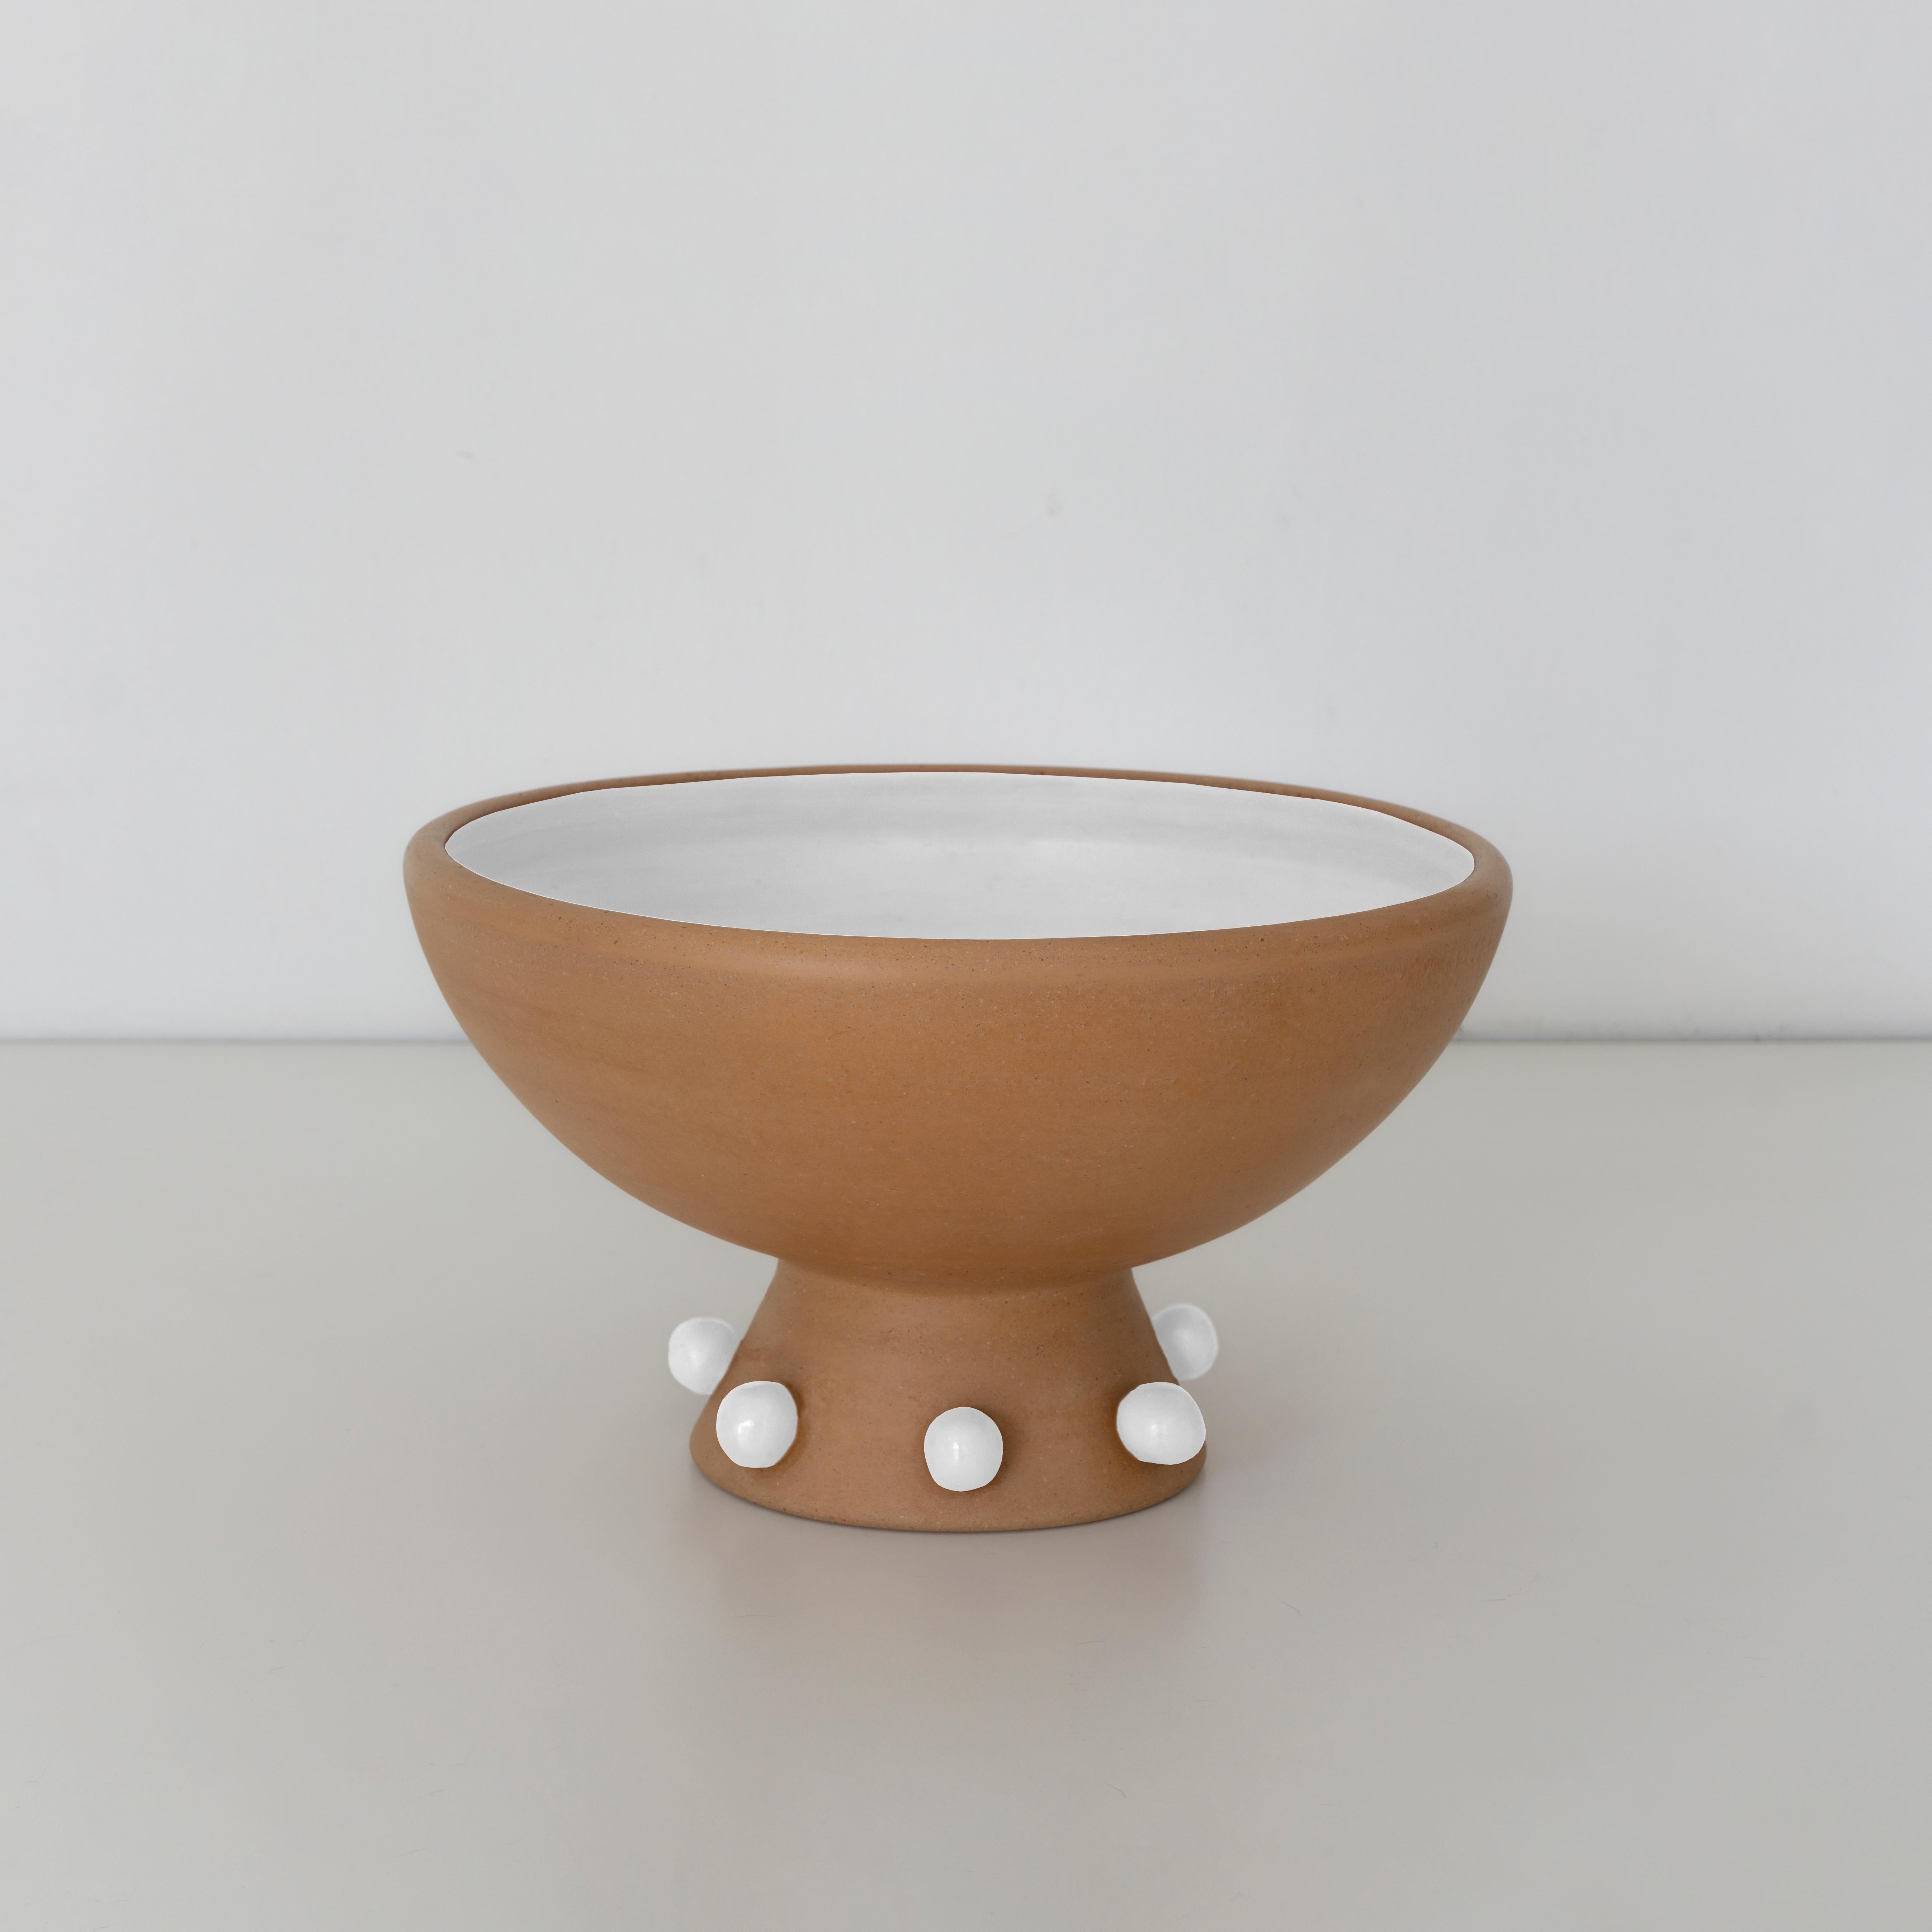 Mexican Decorative Clay Bowl/Vase Danzante 01. Smooth Soft Clay Finish. By Raíz Mx For Sale